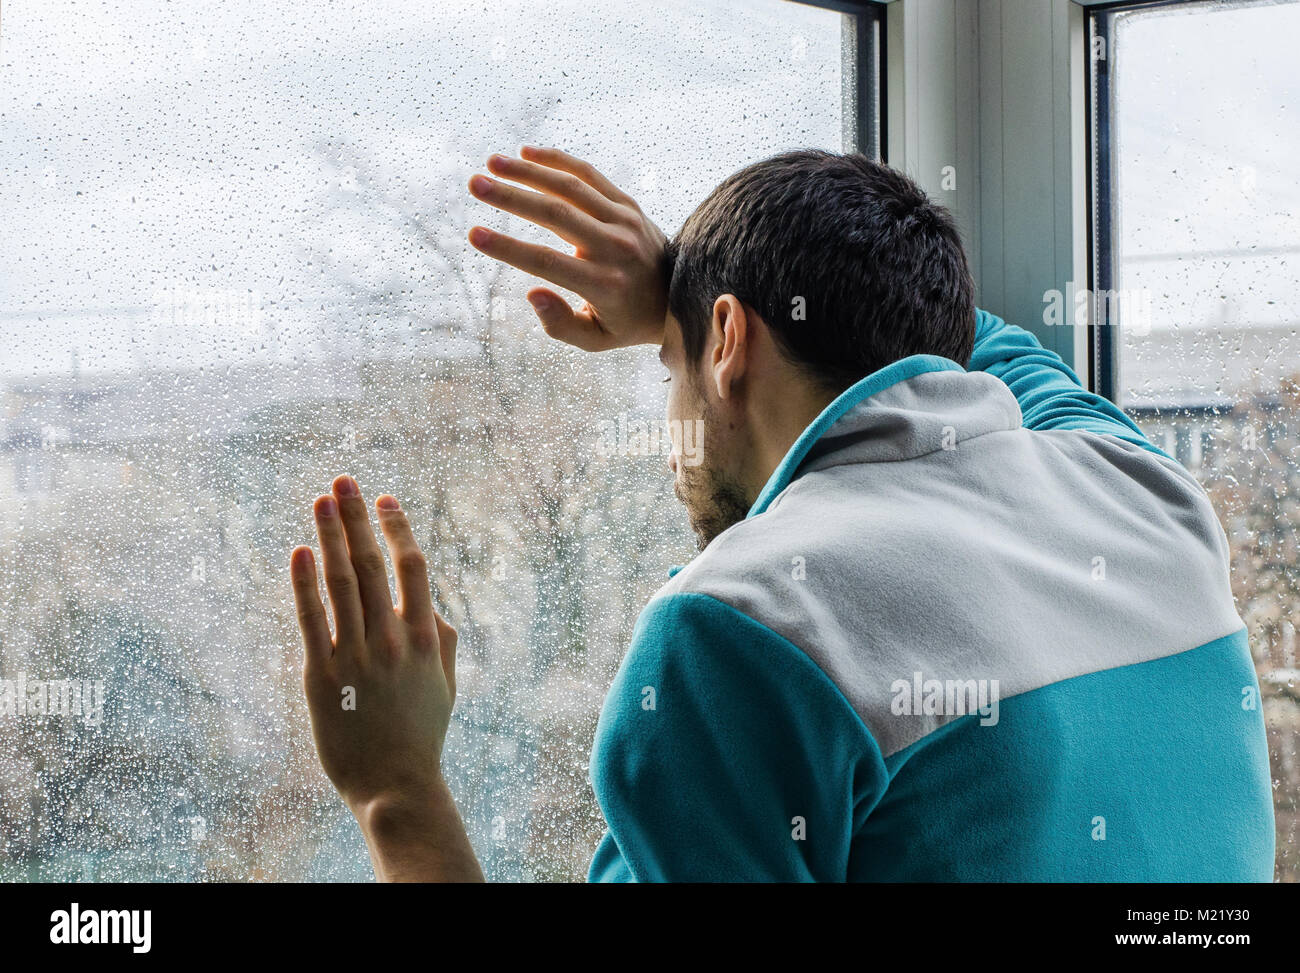 Depressed young man upset with bad news looking through rainy window glass Stock Photo